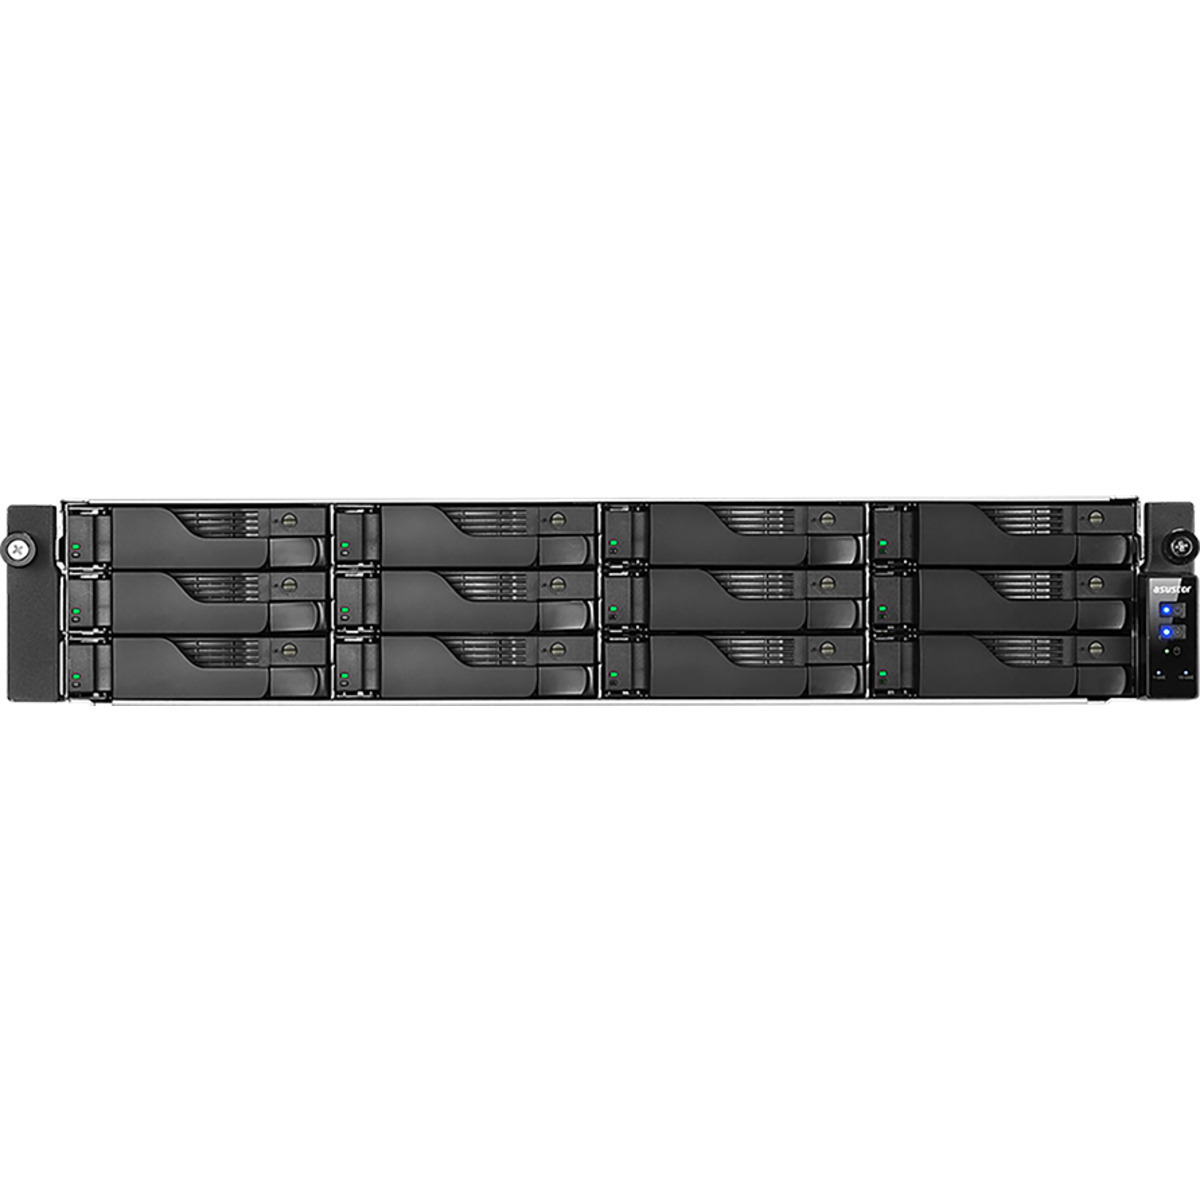 buy $8816 ASUSTOR LOCKERSTOR 12RD AS6512RD 264tb RackMount NAS - Network Attached Storage Device 12x22000gb Seagate IronWolf Pro ST22000NT001 3.5 7200rpm SATA 6Gb/s HDD NAS Class Drives Installed - Burn-In Tested - FREE RAM UPGRADE - nas headquarters buy network attached storage server device das new raid-5 free shipping simply usa LOCKERSTOR 12RD AS6512RD